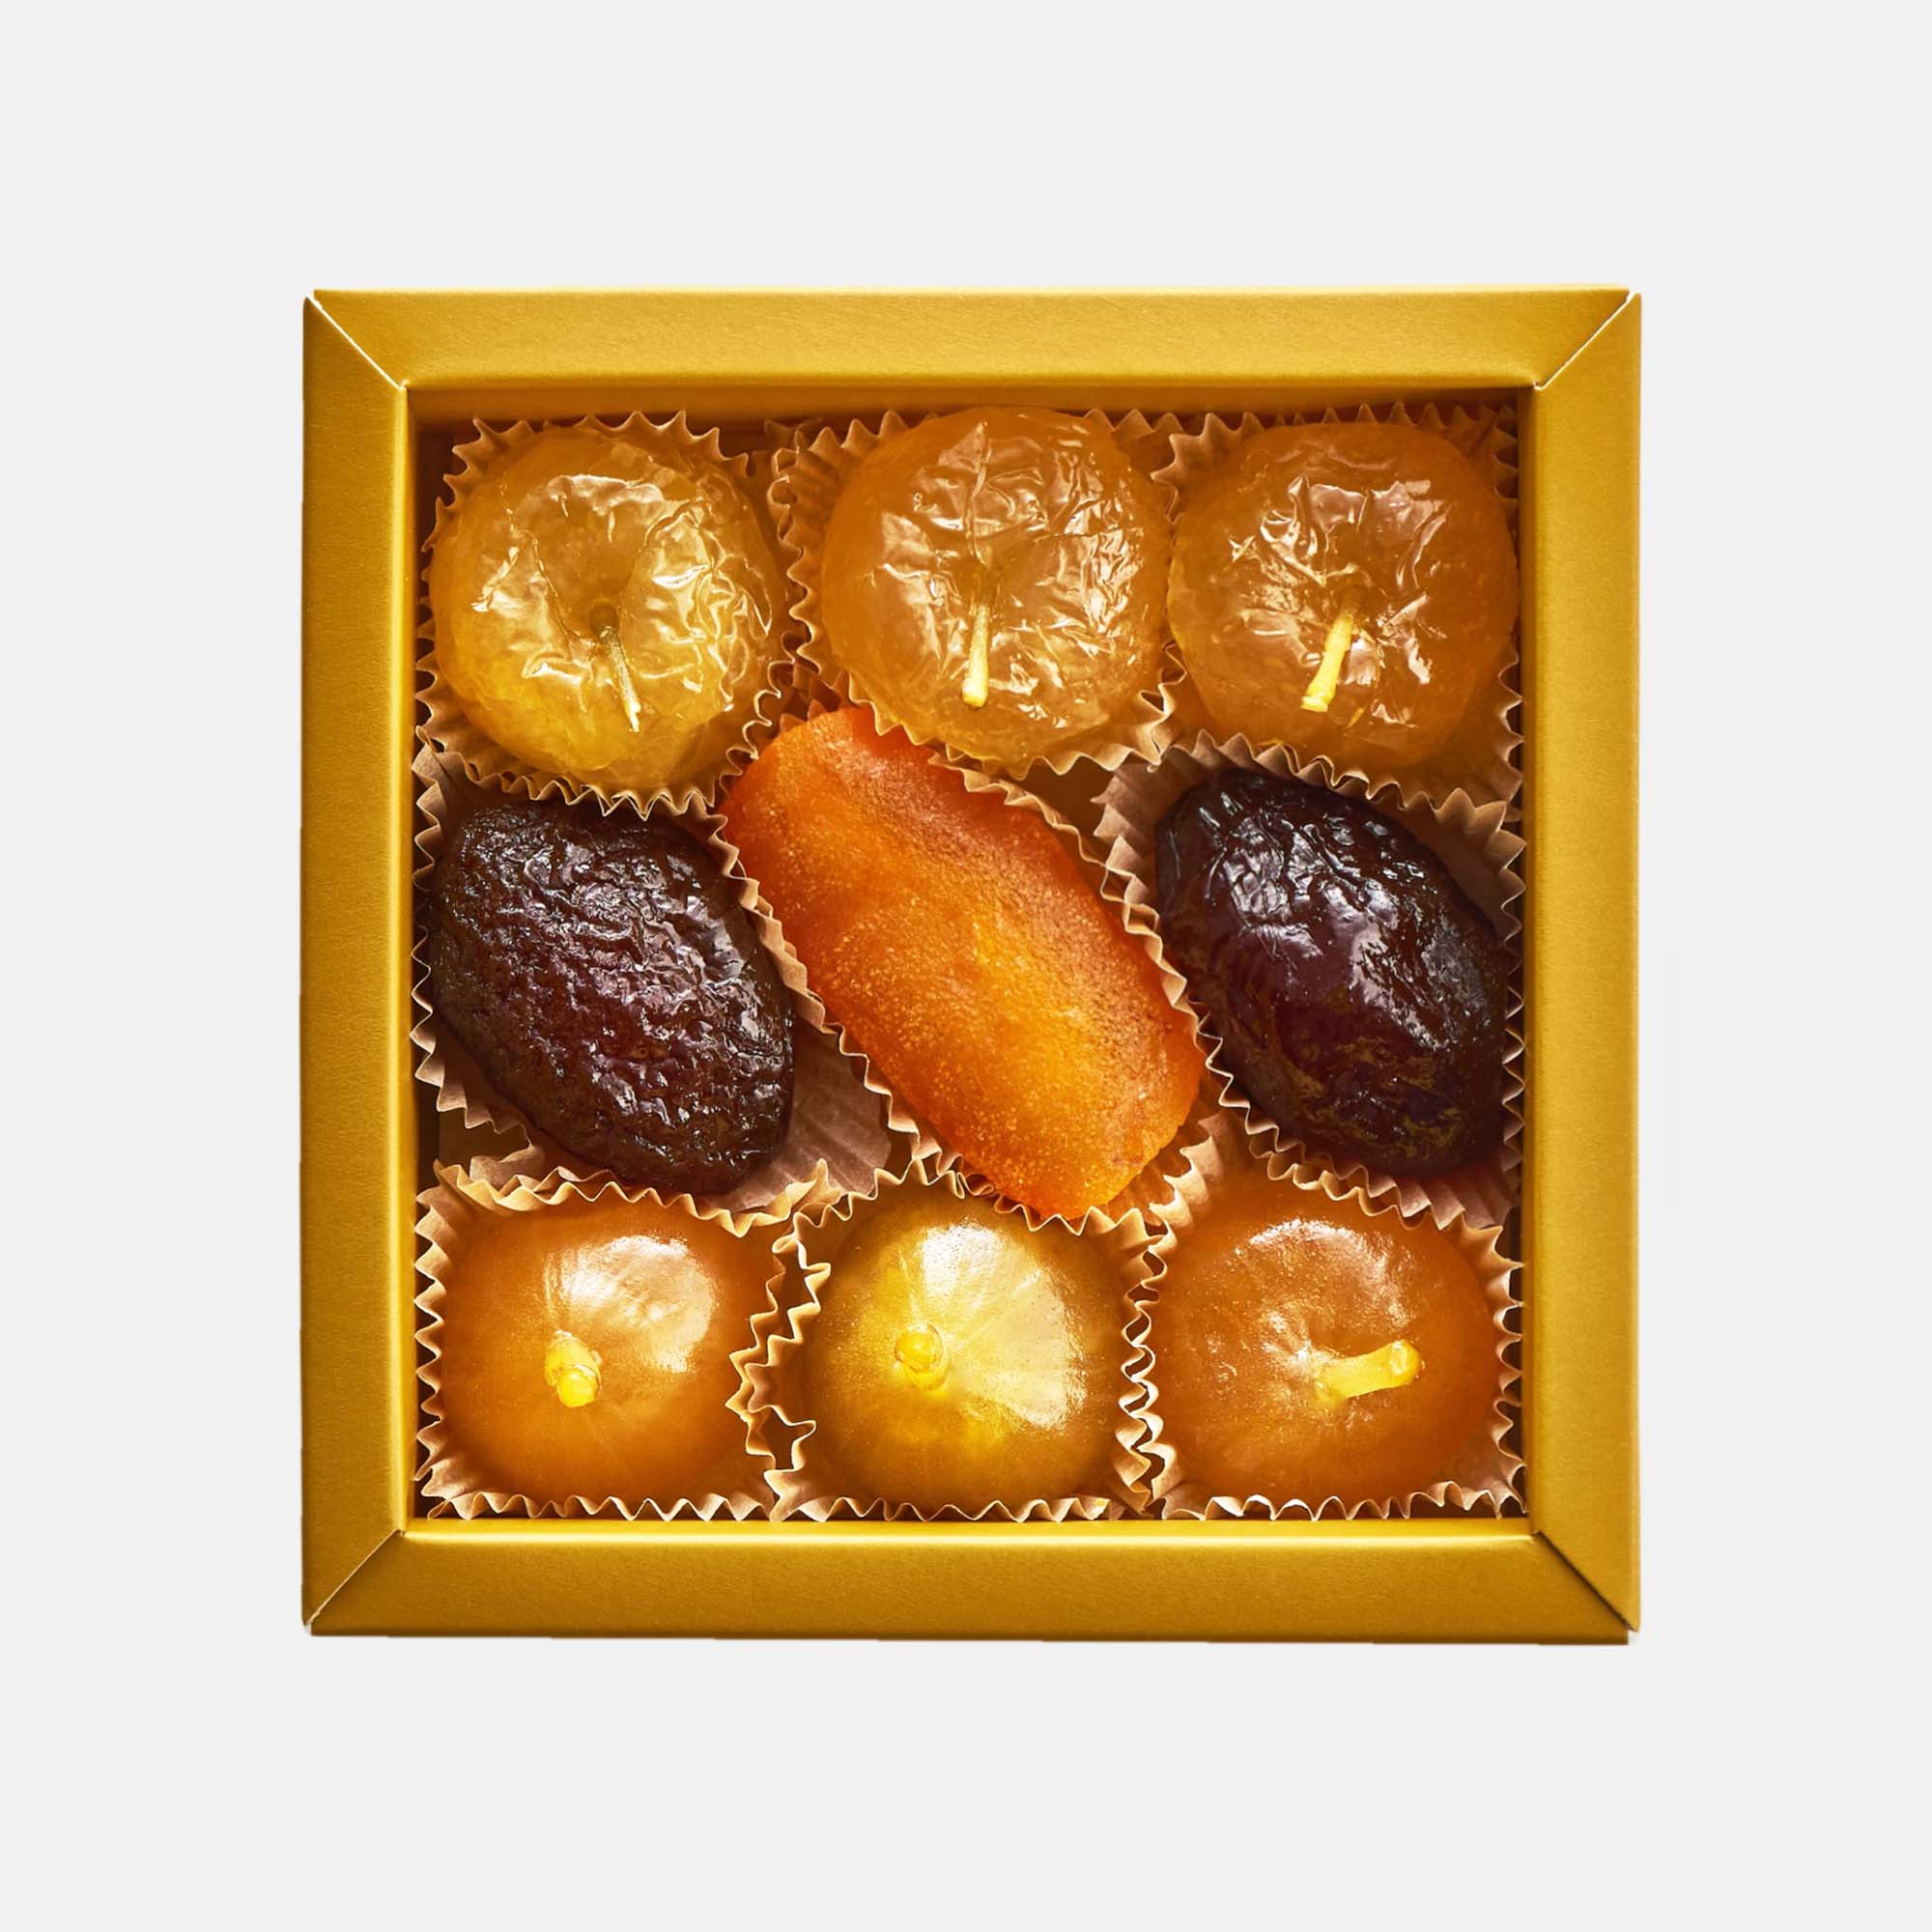 Candied Fruits Selection